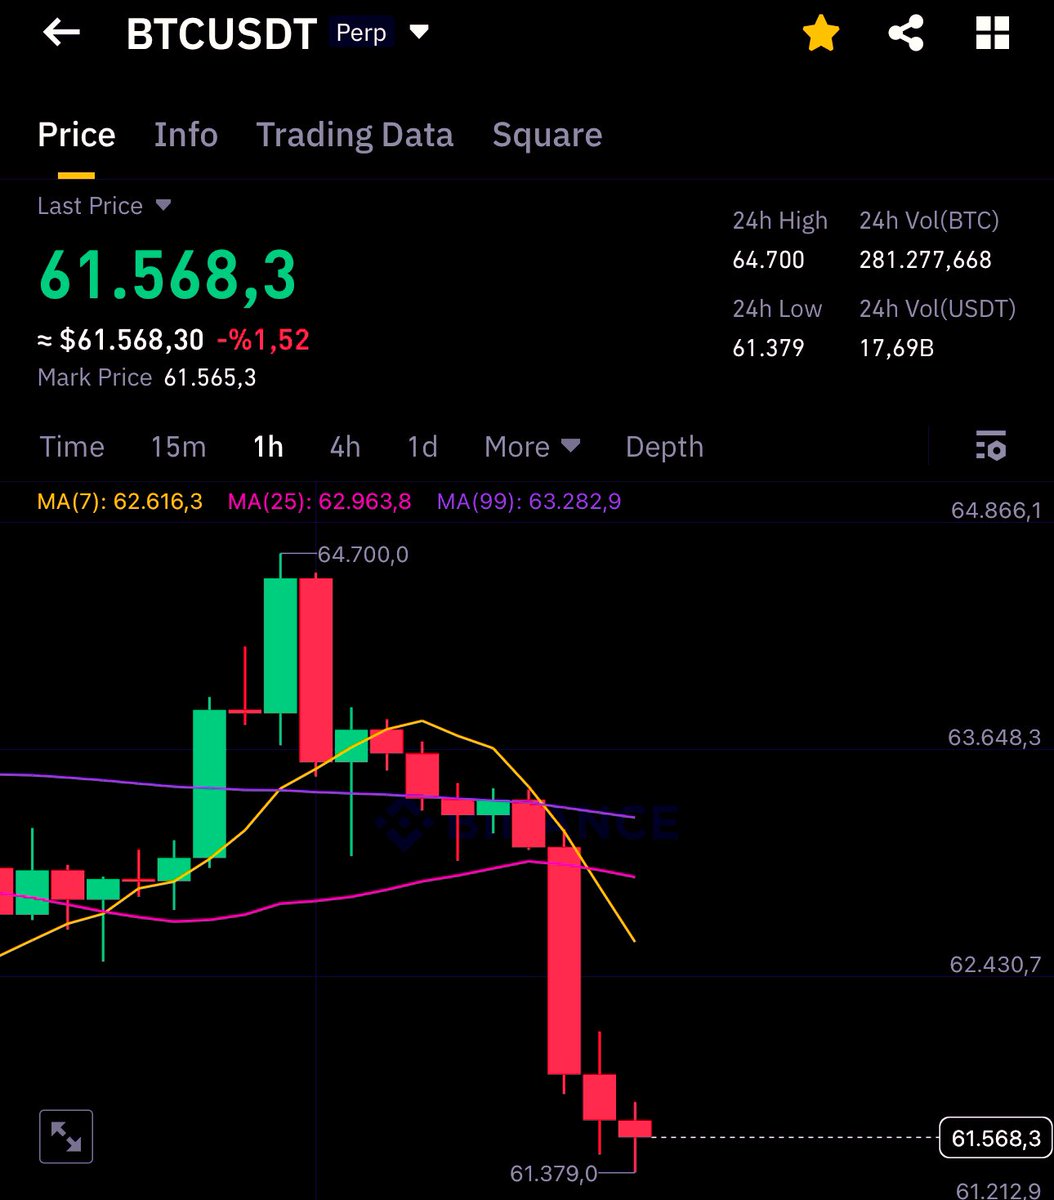 This is Not #Bitcoin Chart. This Is Our Dreams’ Melting Chart 😡
Give Us Our Money Back.
@cz_binance  Without You Everything is Worse 
#Crypto #Altcoins  #Btc